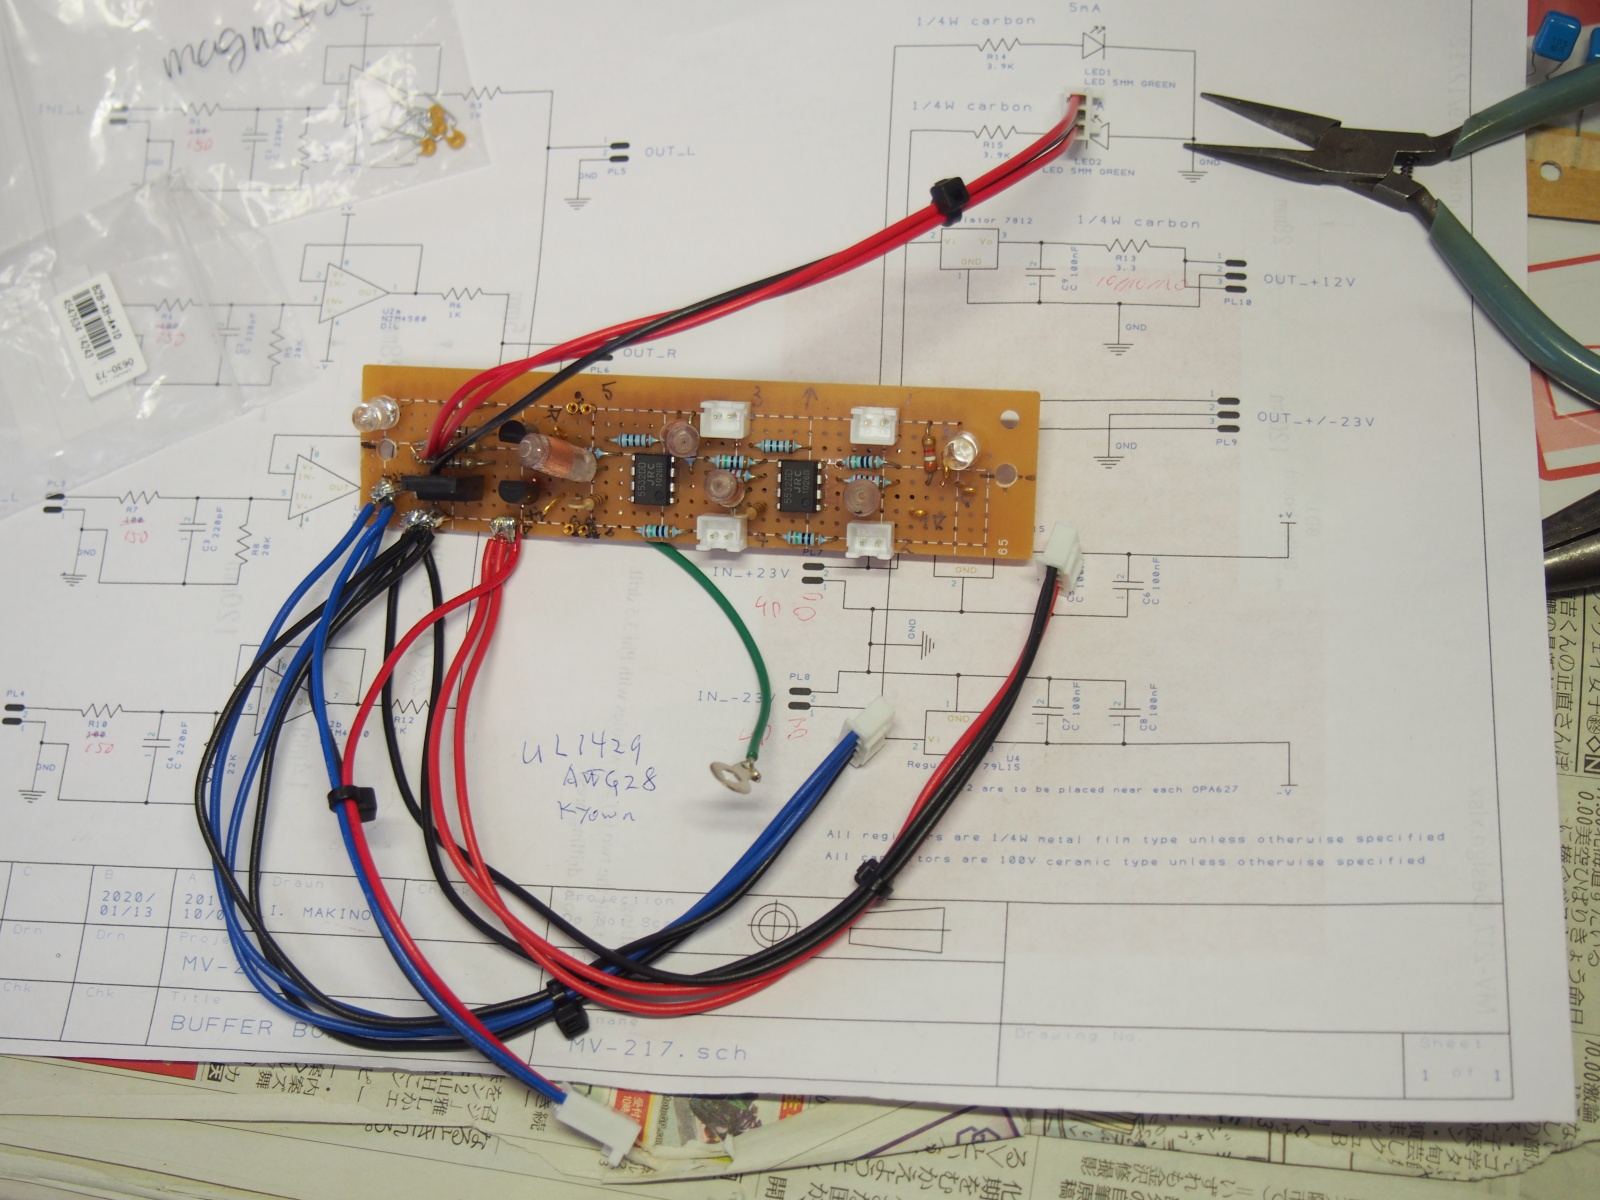 Buffer Board with inter-board cables soldered to it